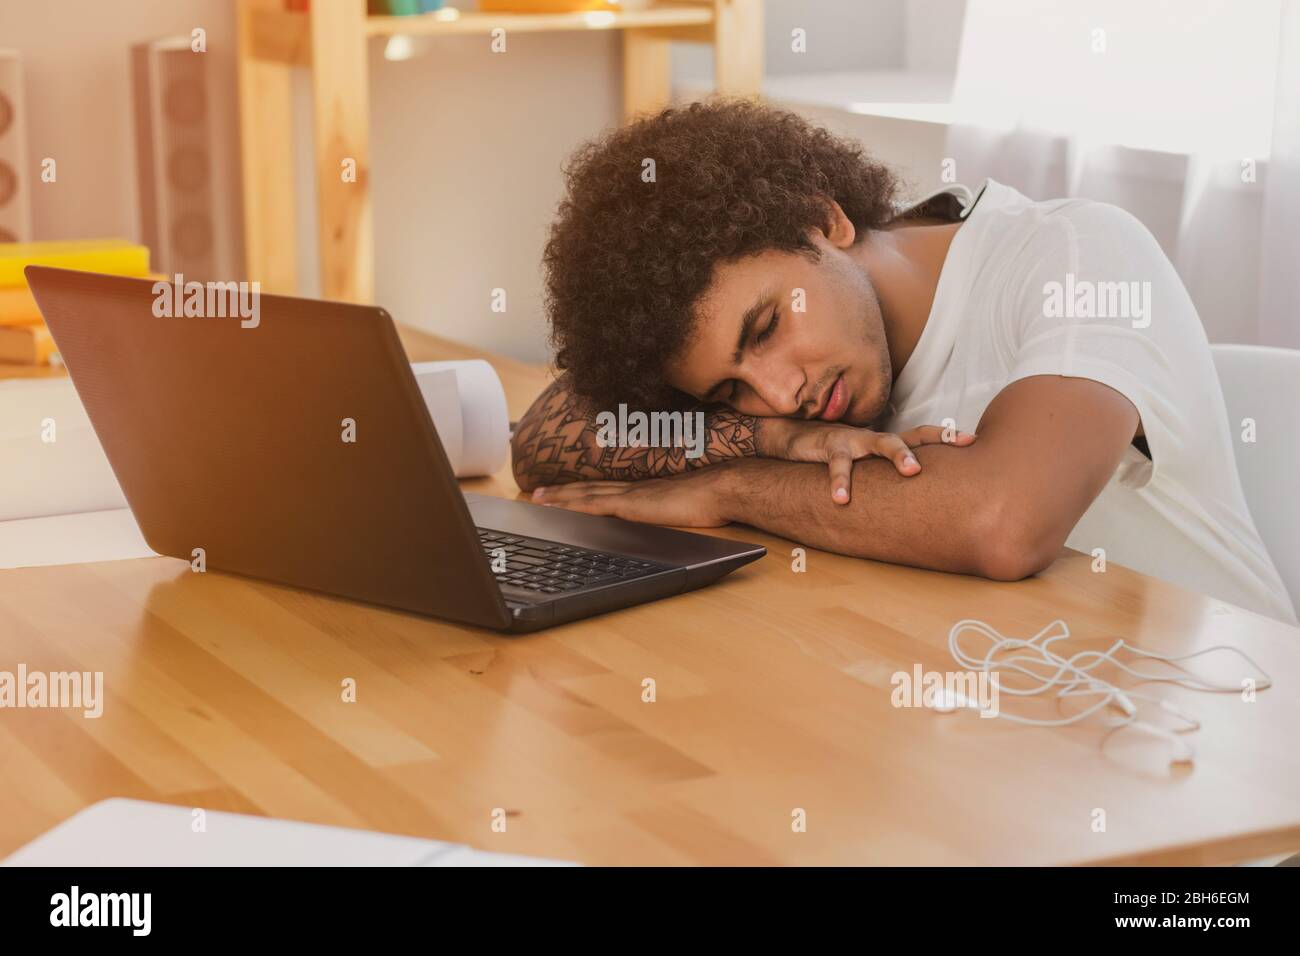 tired man leaned elbows on the table and closed eyes, while working at the computer. On the desk is a laptop and other tools for office working Stock Photo